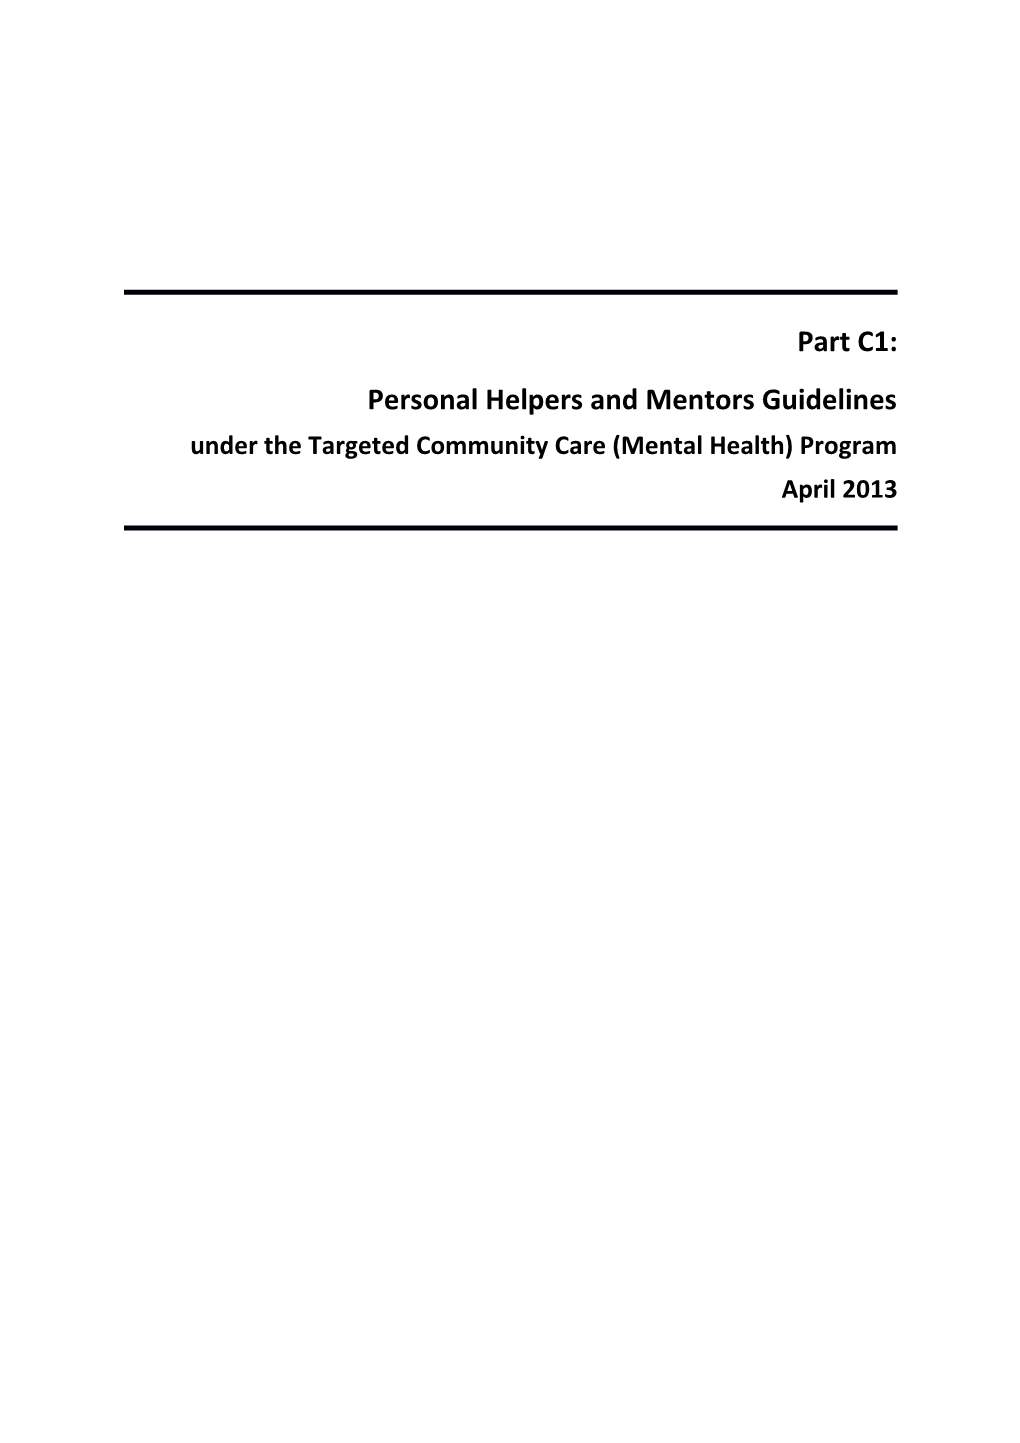 Part C1: Personal Helpers and Mentors Guidelines Under the Targeted Community Care (Mental